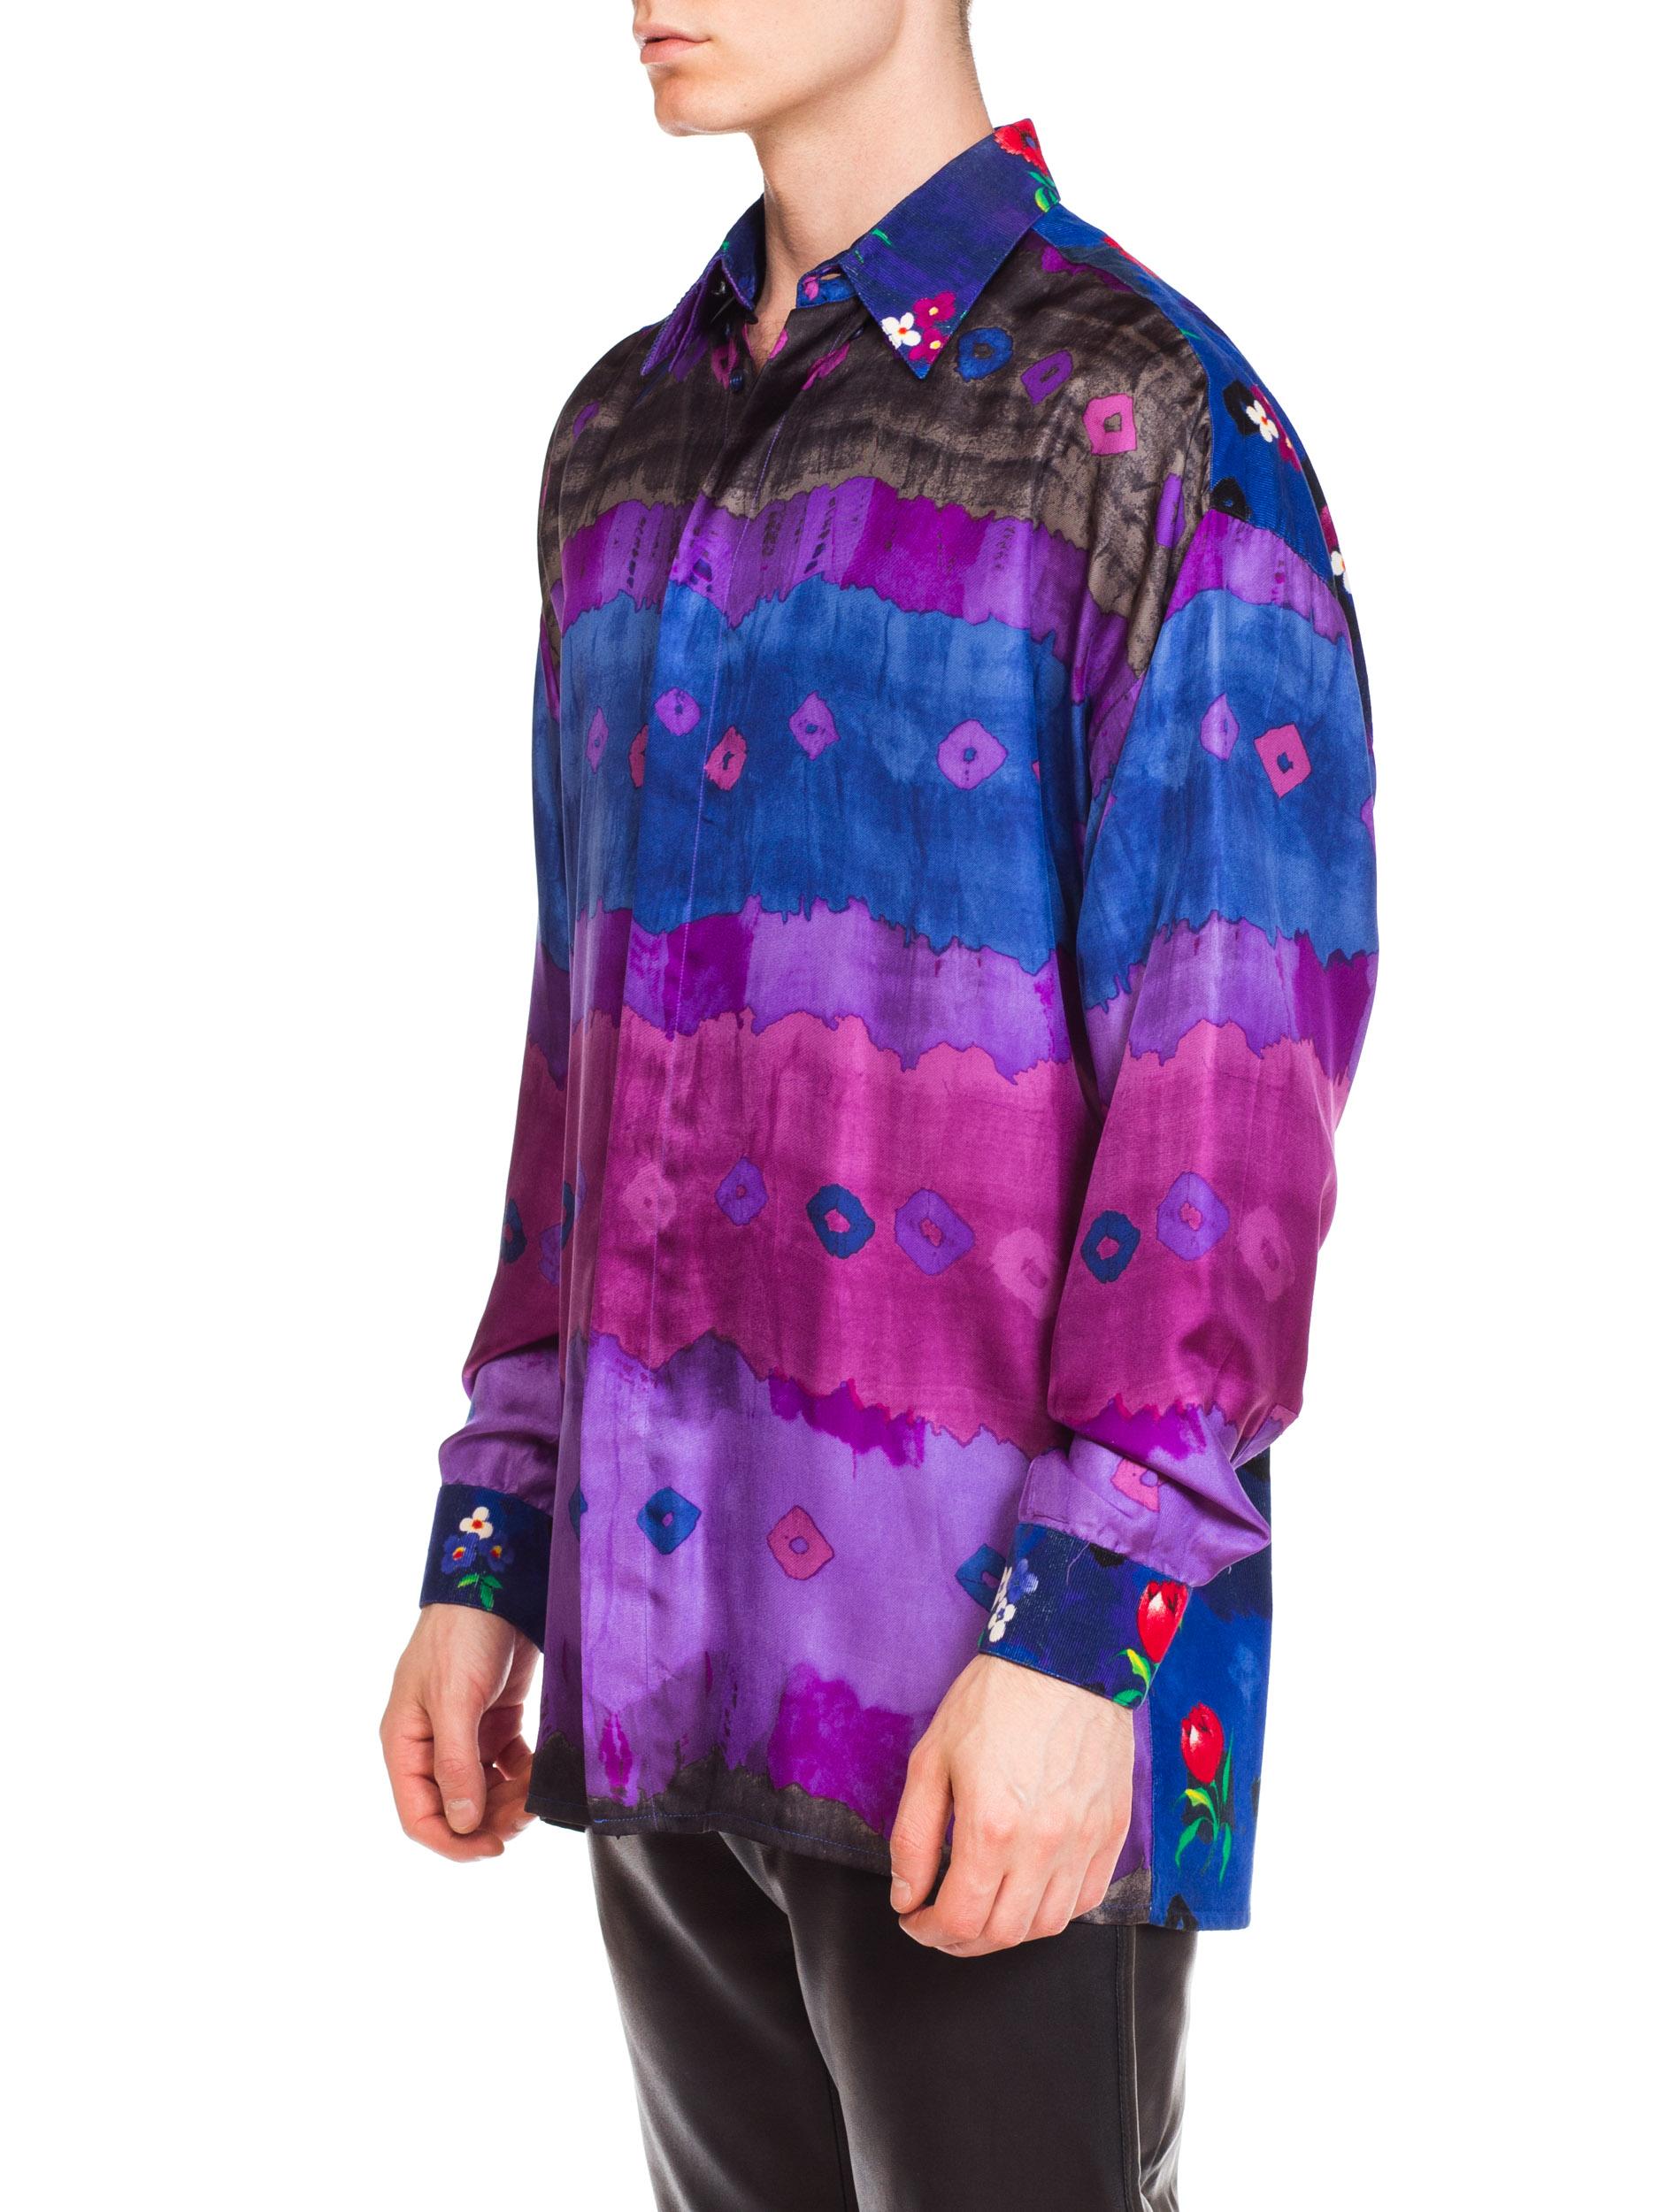 1990S GIANNI VERSACE Purple Tie Dyed Silk & Floral Printed Corduroy Men's  Shir For Sale 4